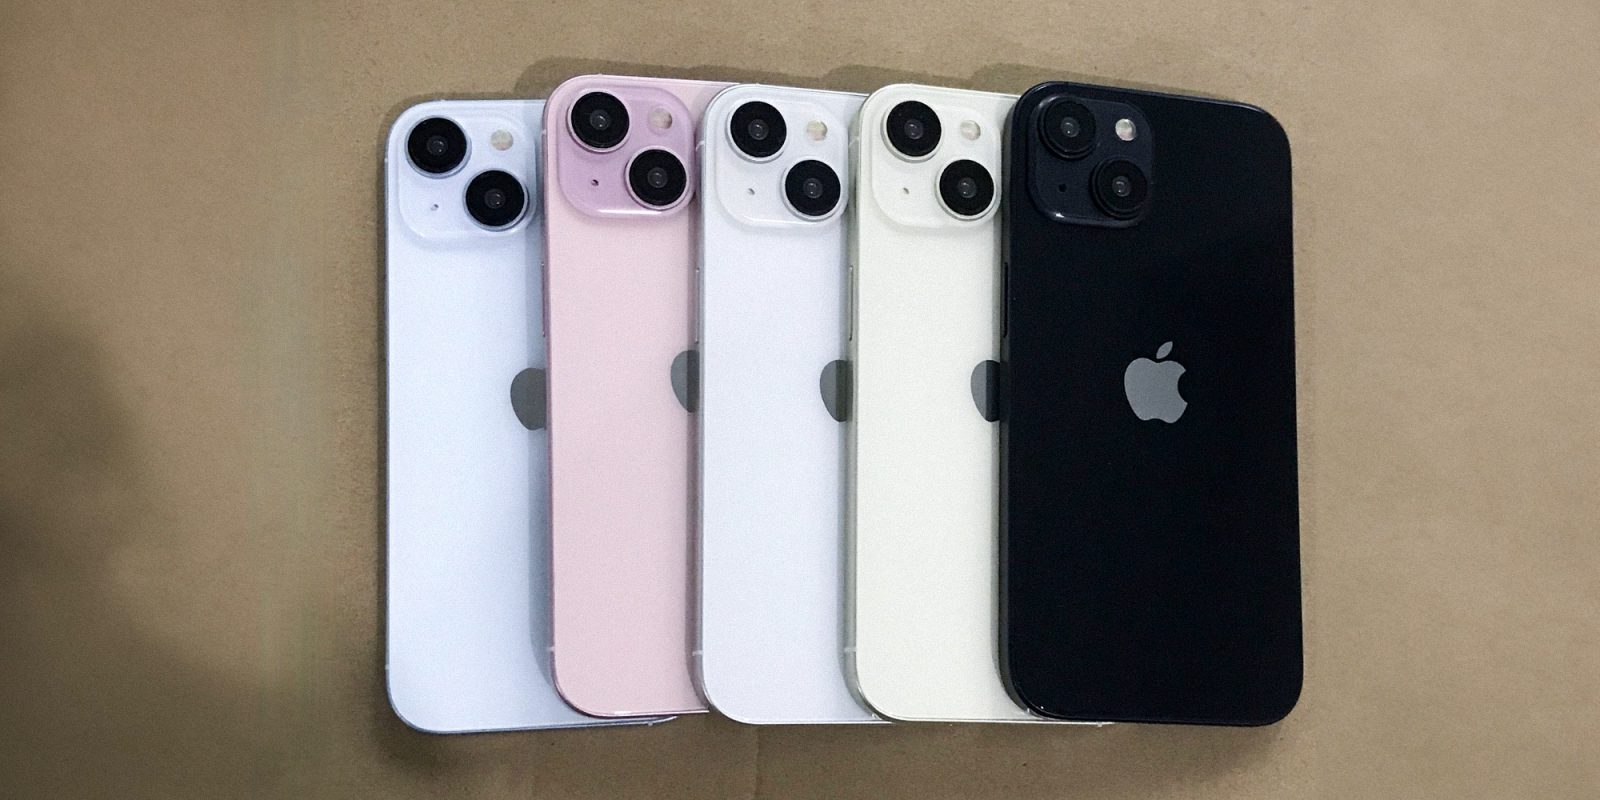 Here's another look at the rumored boring new colors for the iPhone 15